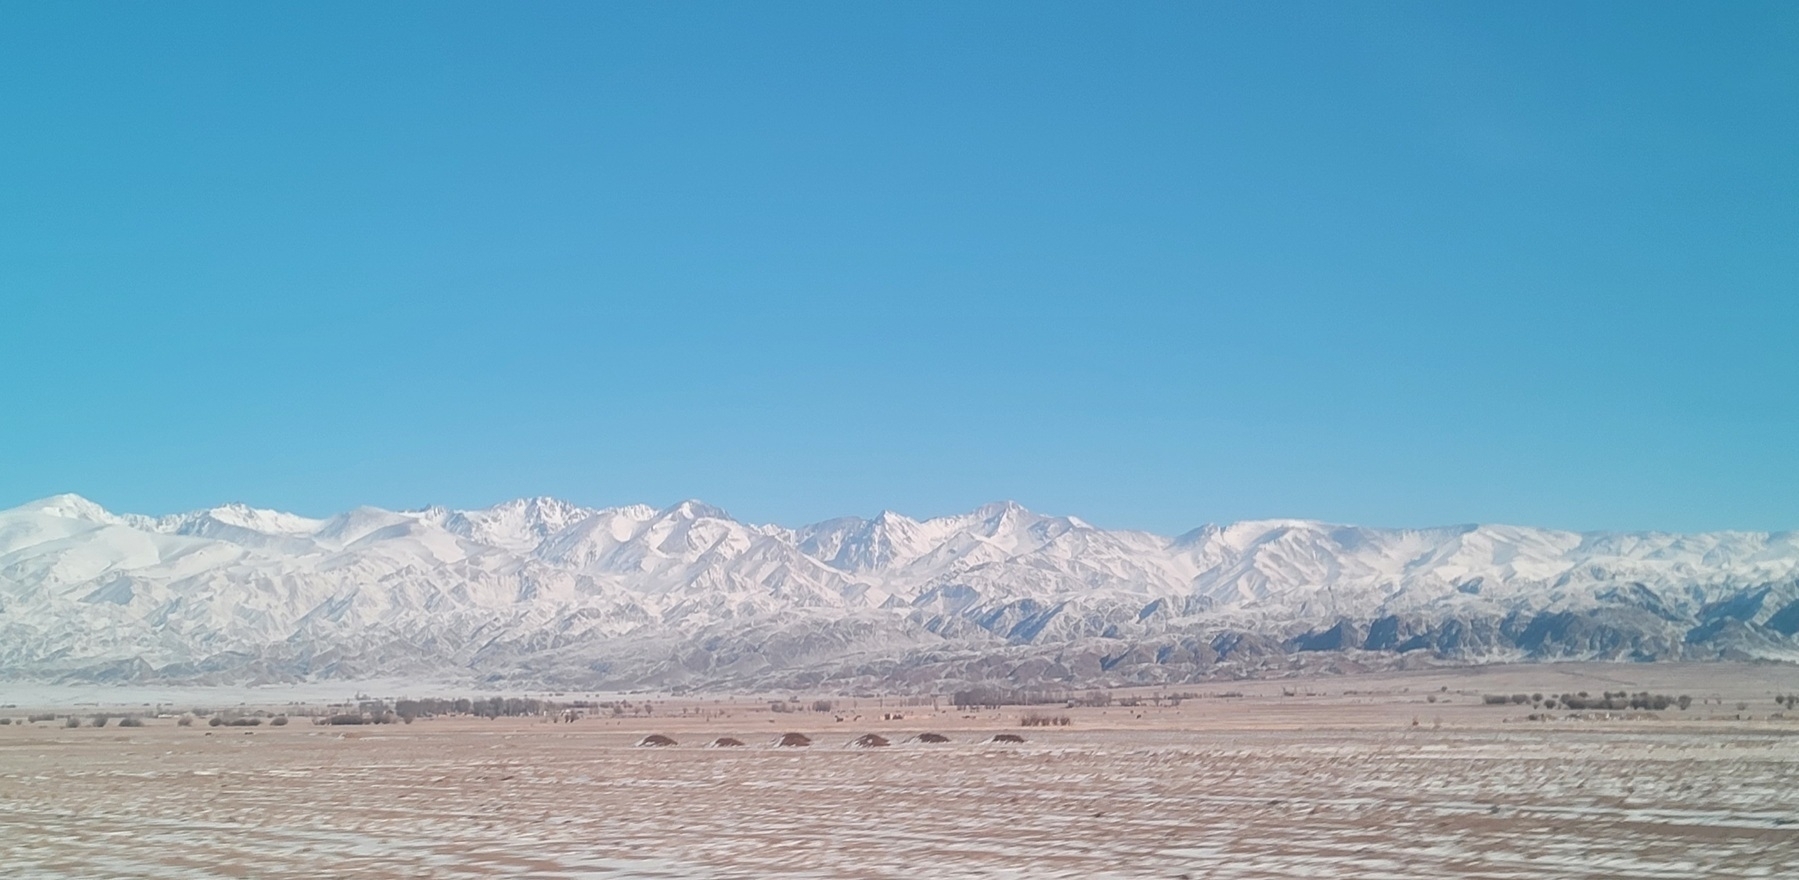 white mountains in front of a brown field with splotches of white snow